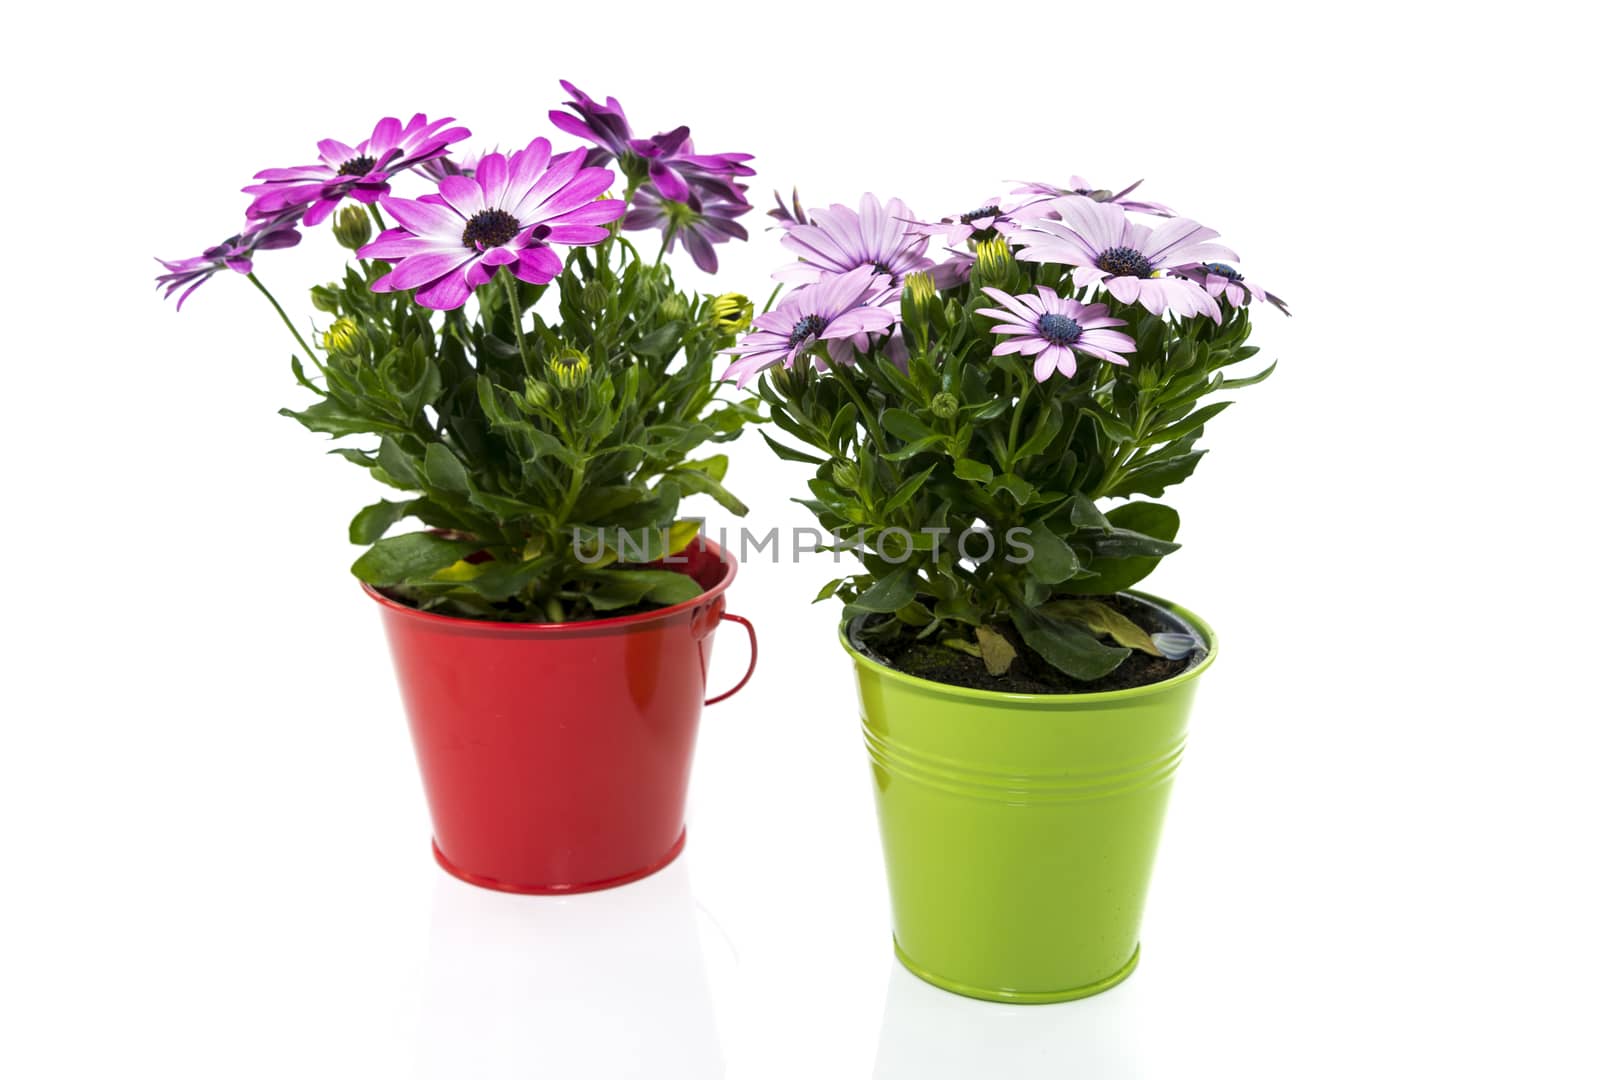 spanish daisy flowers in red and green bucket  by compuinfoto